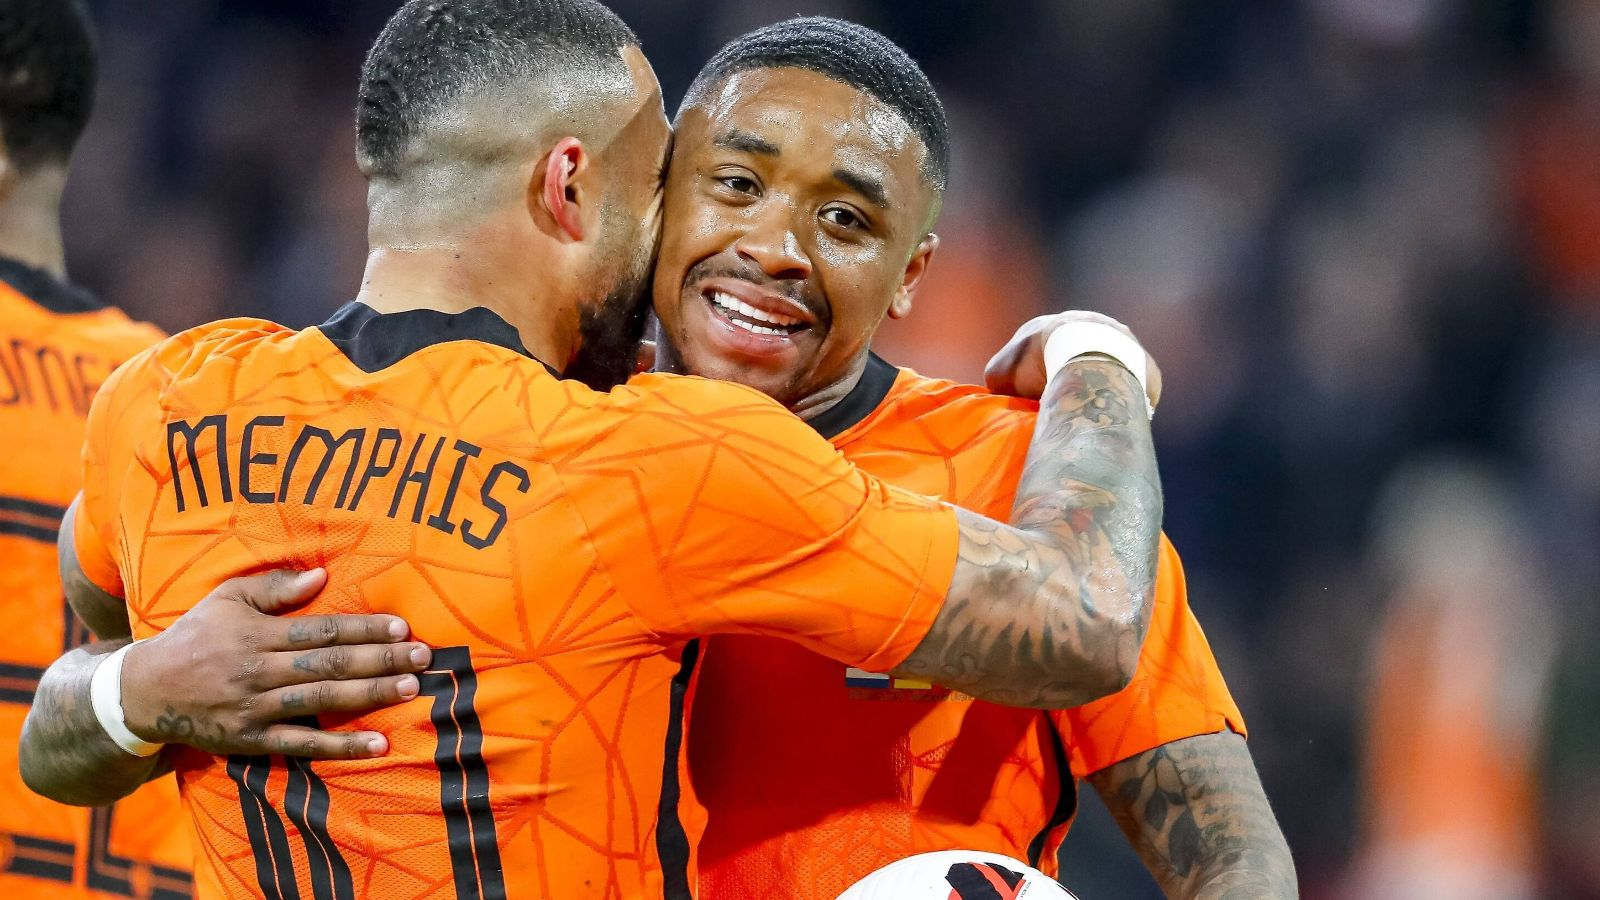 Memphis Depay and Steven Bergwijn are likely to be included in the Netherlands’ starting XI